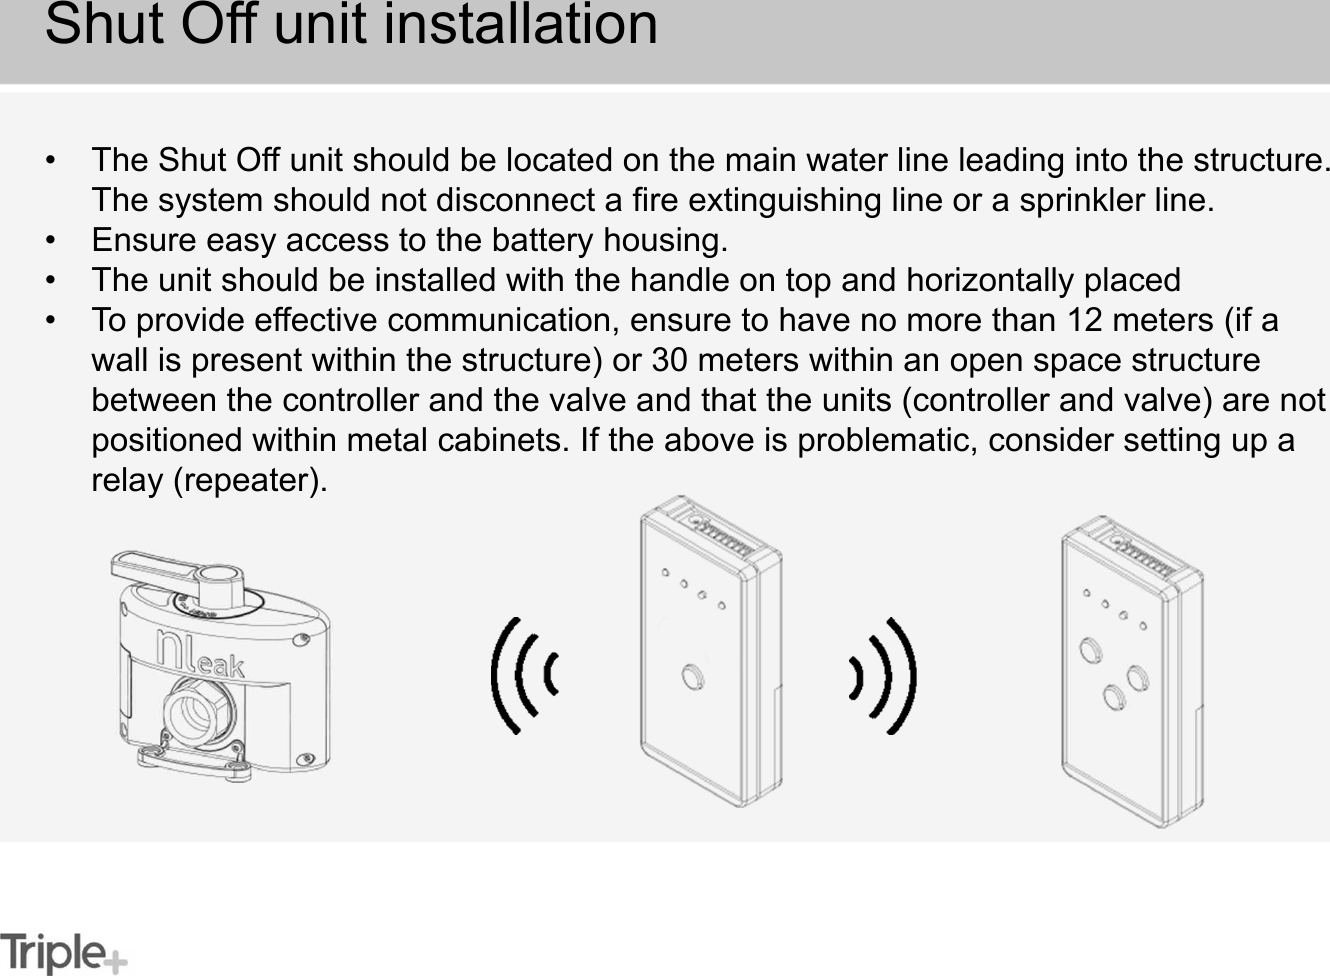 • The Shut Off unit should be located on the main water line leading into the structure. The system should not disconnect a fire extinguishing line or a sprinkler line.• Ensure easy access to the battery housing.• The unit should be installed with the handle on top and horizontally placed• To provide effective communication, ensure to have no more than 12 meters (if a wall is present within the structure) or 30 meters within an open space structure between the controller and the valve and that the units (controller and valve) are not positioned within metal cabinets. If the above is problematic, consider setting up a relay (repeater).Shut Off unit installation